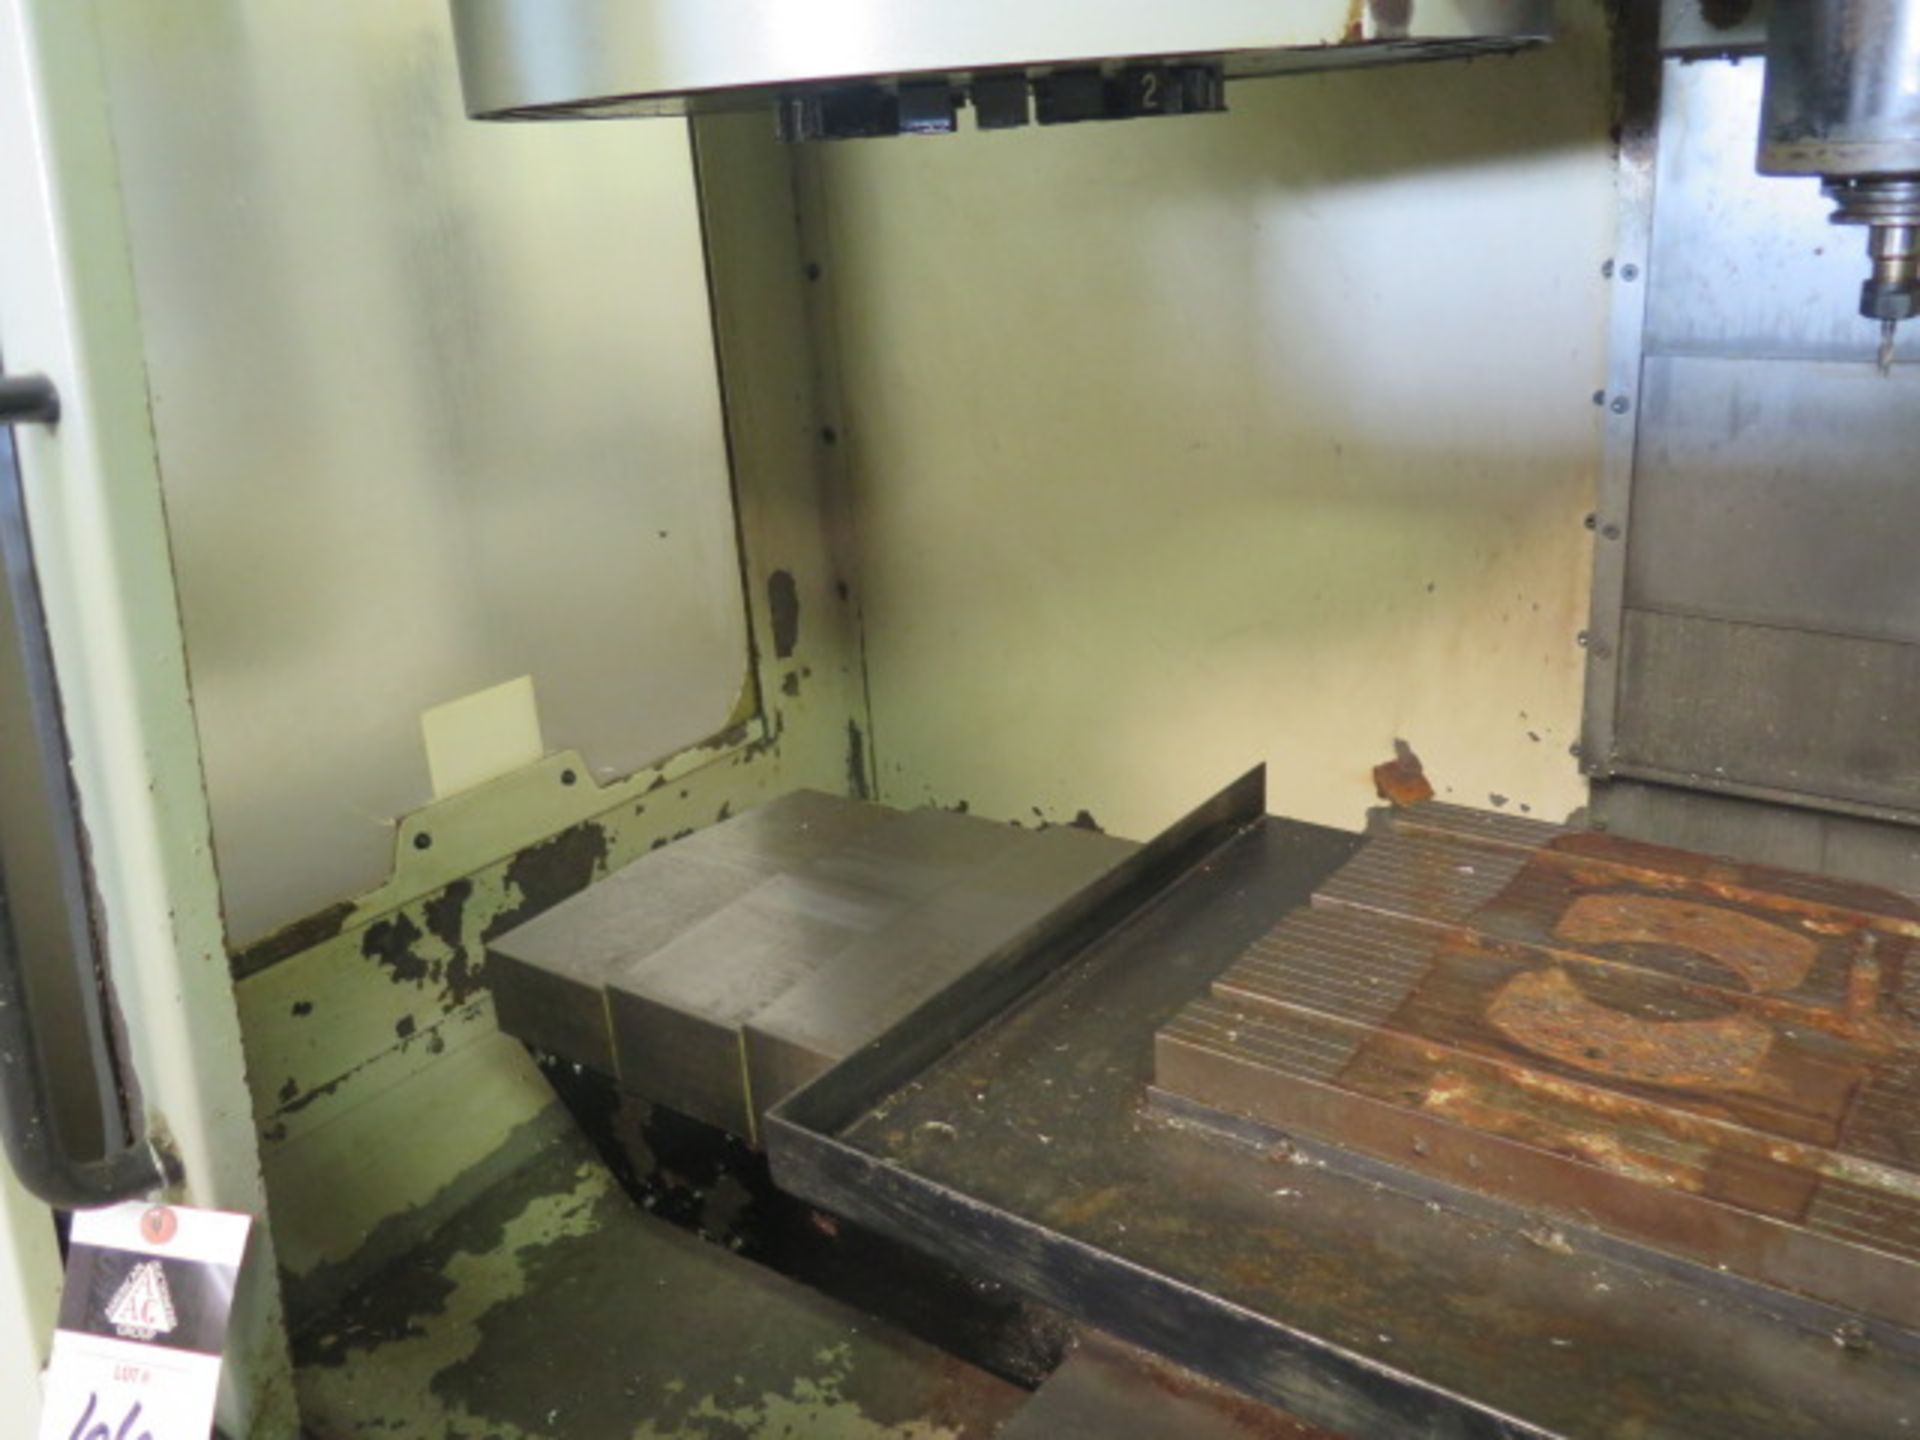 1994 Haas VF-0 CNC Vertical Machining Center s/n 3572 w/ Haas Controls, 20-Station ATC, CAT-40 Taper - Image 9 of 15